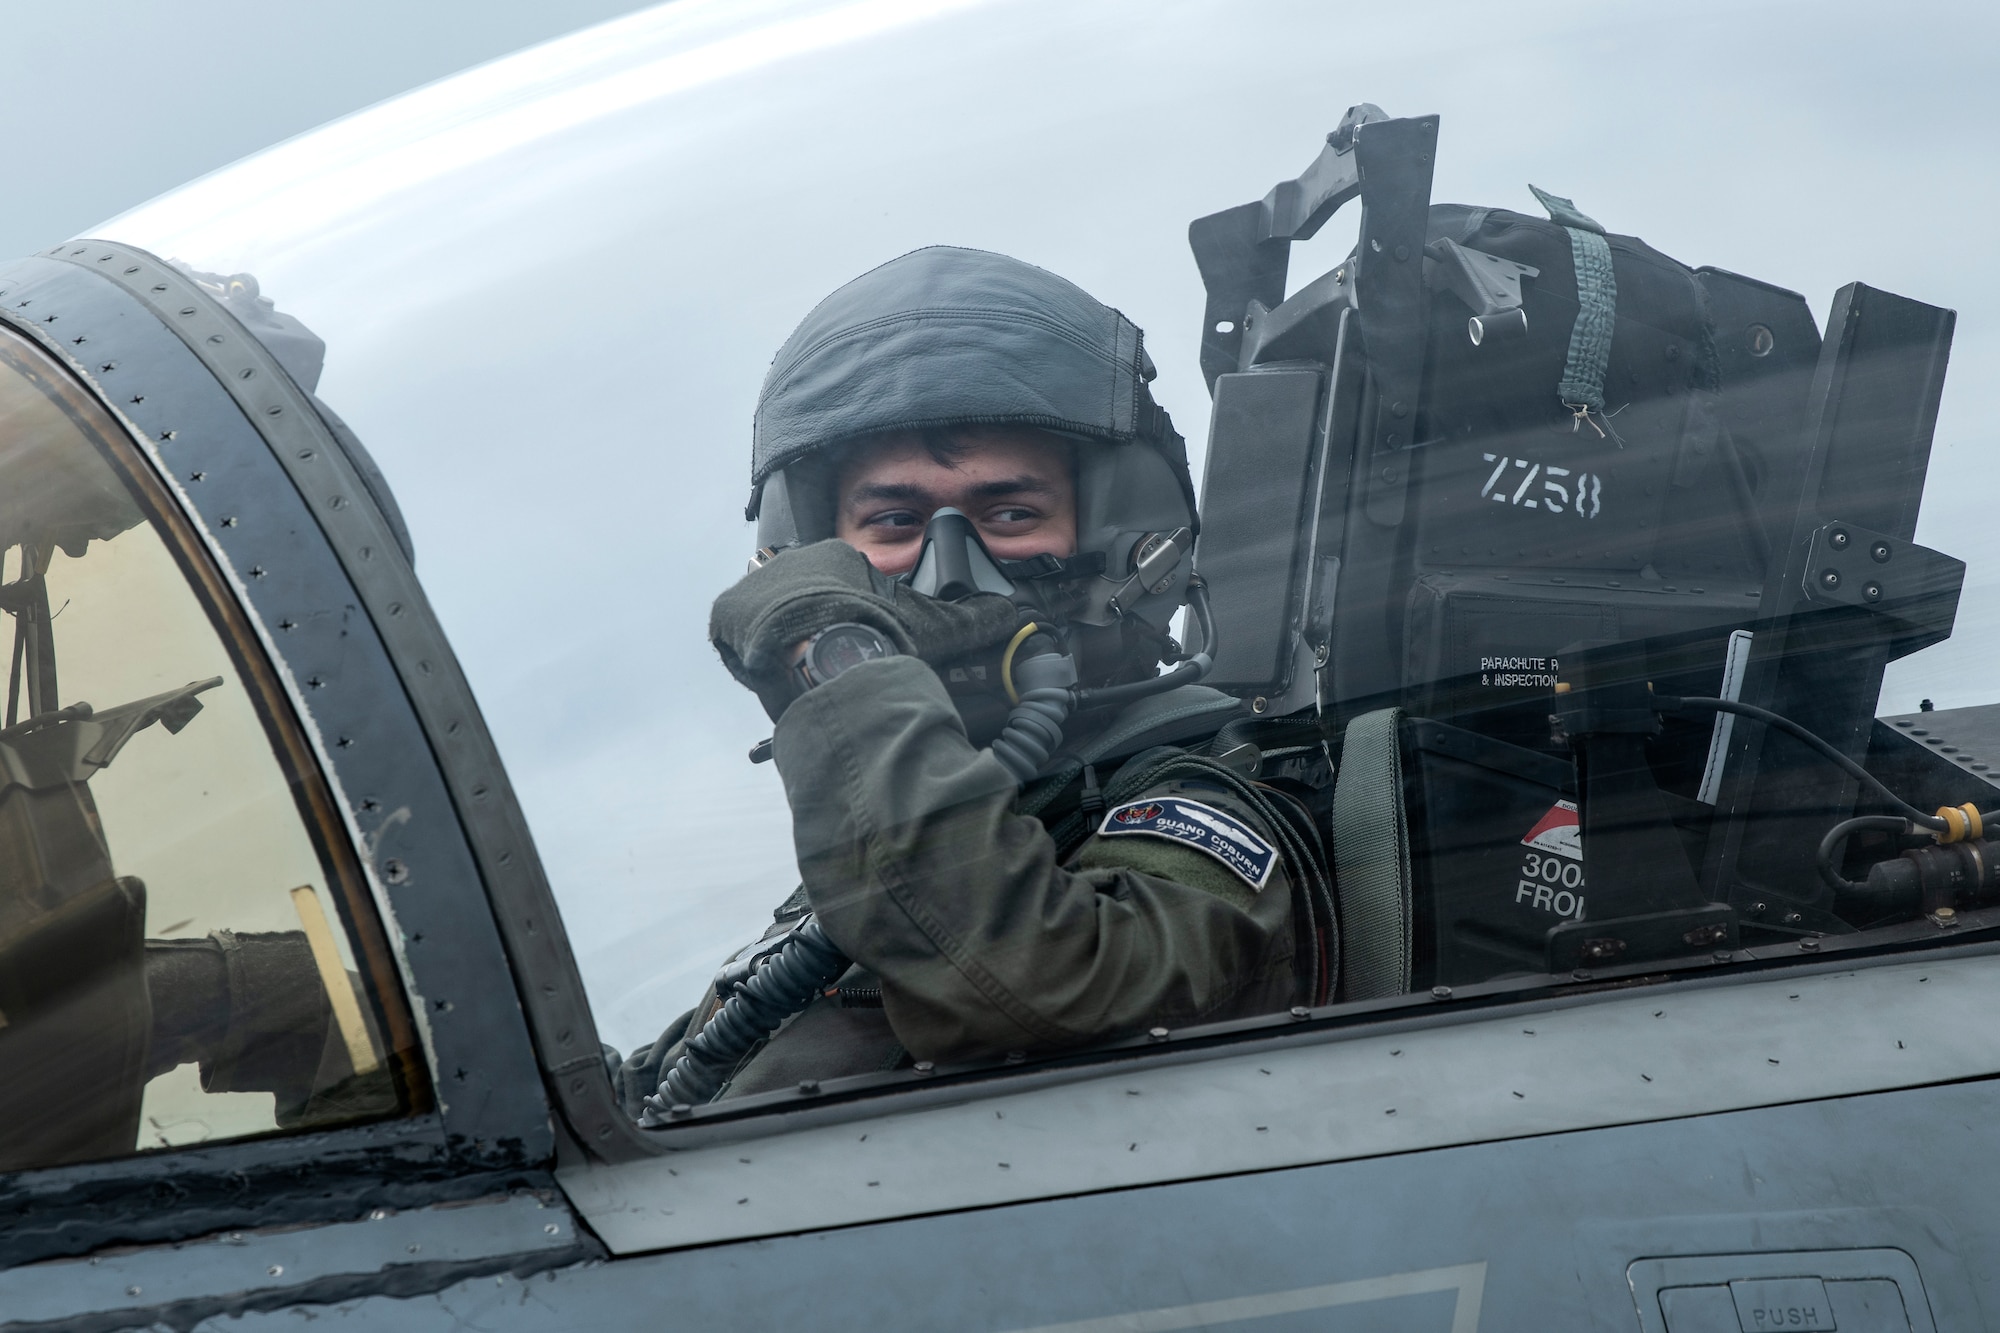 U.S. Air Force 1st Lt. Sebastian Coburn, 44th Fighter Squadron F-15C Eagle pilot, communicates with ground crew during a super surge exercise at Kadena Air Base, Japan, Oct. 19, 2021. 18th Wing fighter squadrons can fly more than 100 sorties a day while conducting surge operations, honing air-to-air tactics and advanced combat maneuvers. (U.S. Air Force photo by Senior Airman Jessi Monte)